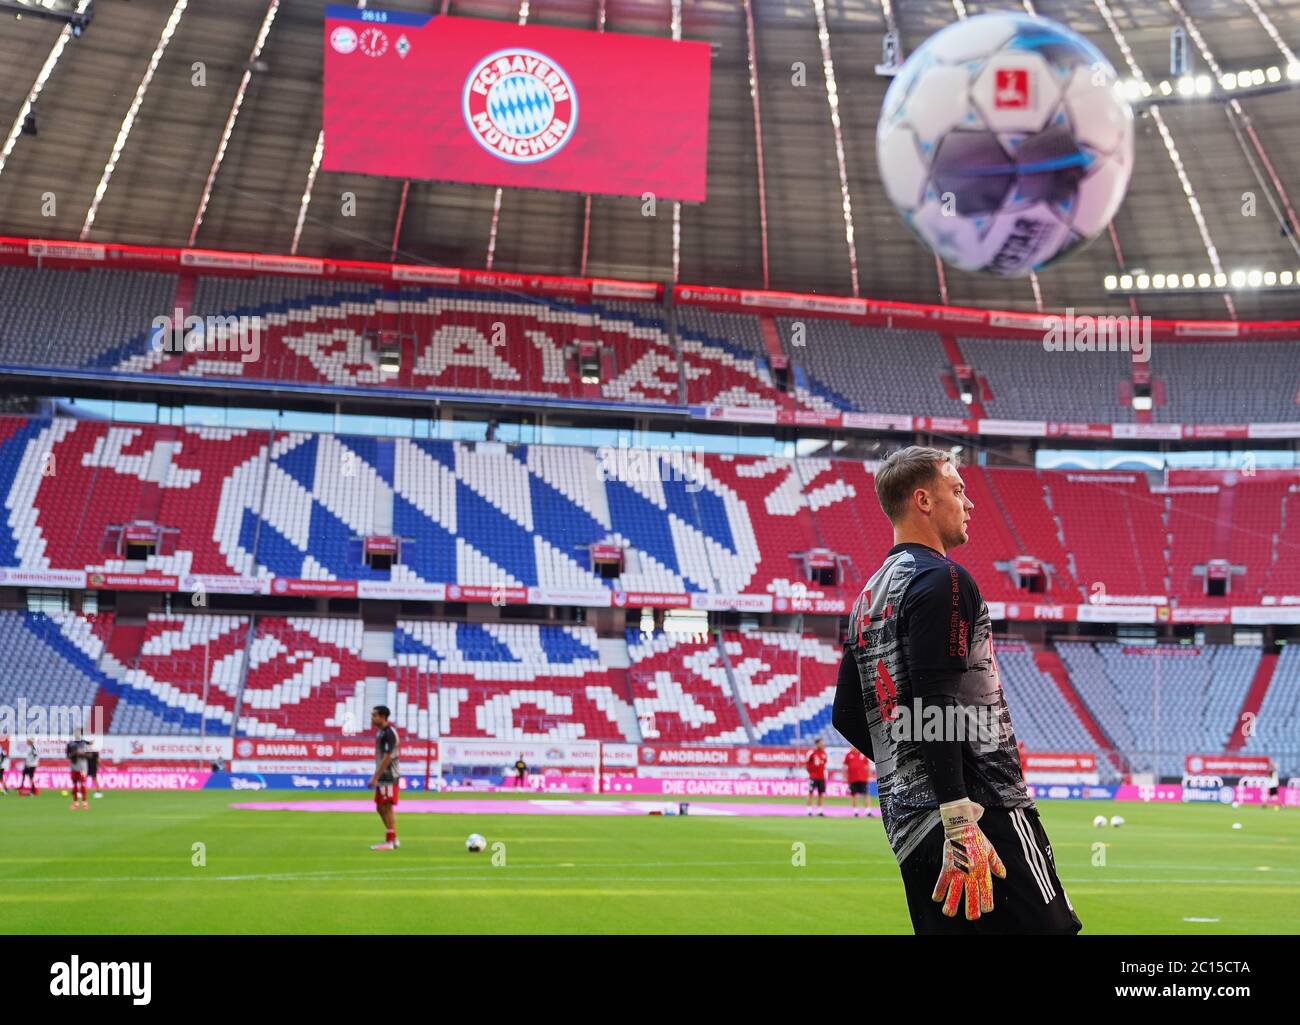 Munich, Germany, 13. Juni 2020,  Manuel NEUER, FCB 1  beim Spiel FC BAYERN Munich - BORUSSIA MOENCHENGLADBACH in der 1.Bundesliga, Saison 2019/2020, 31.Spieltag, Gladbach,  © Peter Schatz / Alamy Live News   Important: DFL REGULATIONS PROHIBIT ANY USE OF PHOTOGRAPHS as IMAGE SEQUENCES and/or QUASI-VIDEO -  National and international News-Agencies OUT Editorial Use ONLY Stock Photo